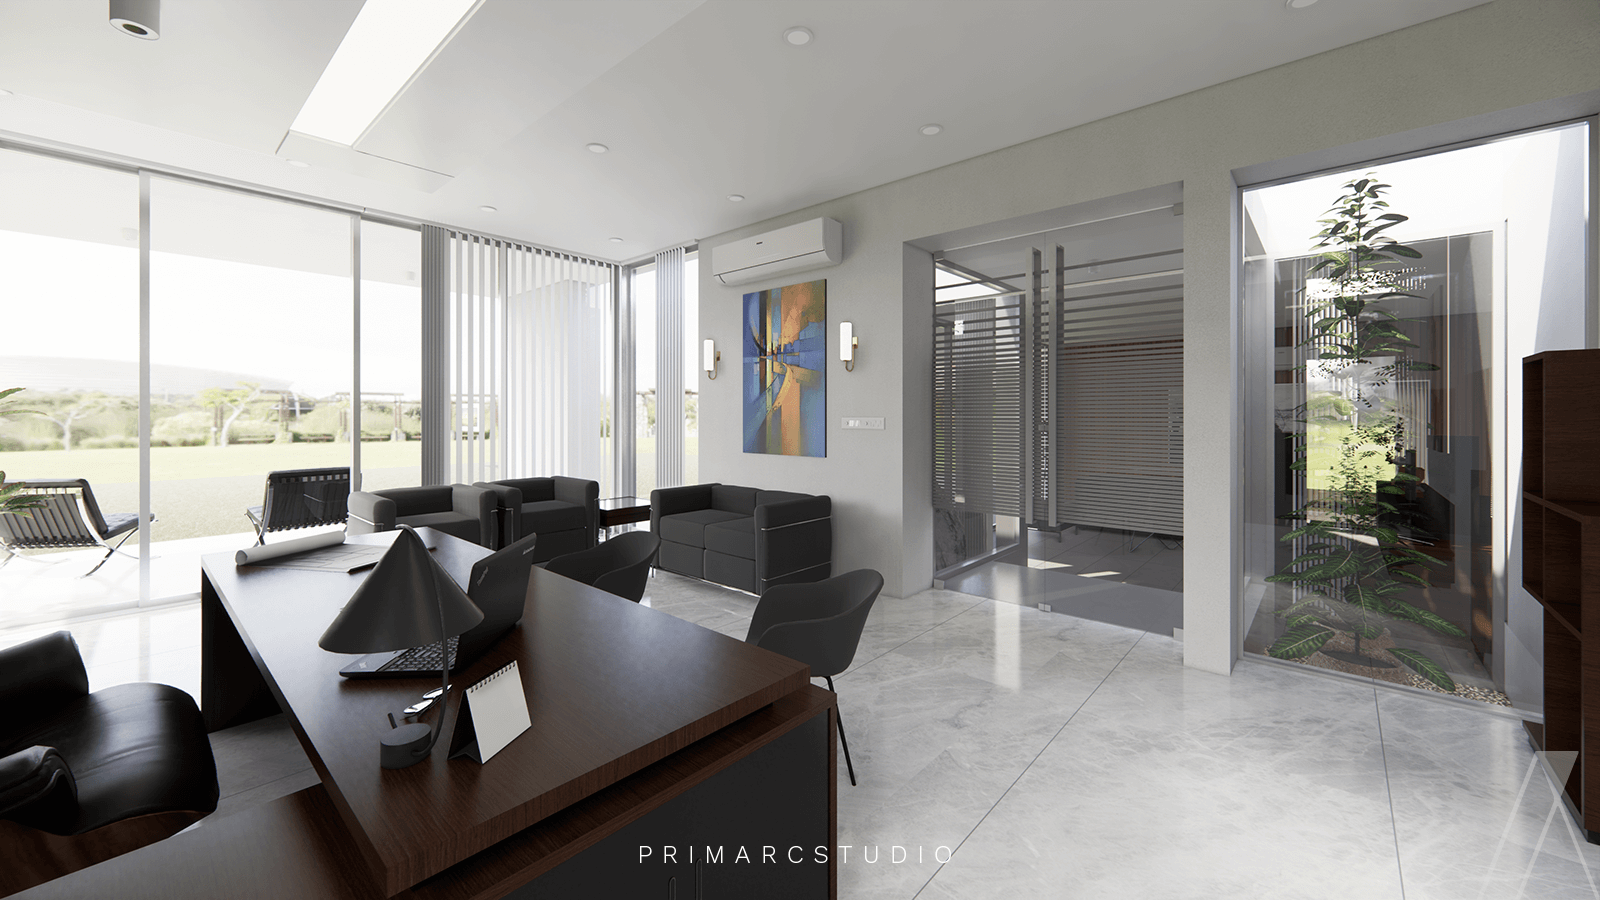 main office interior design with view towards the outside